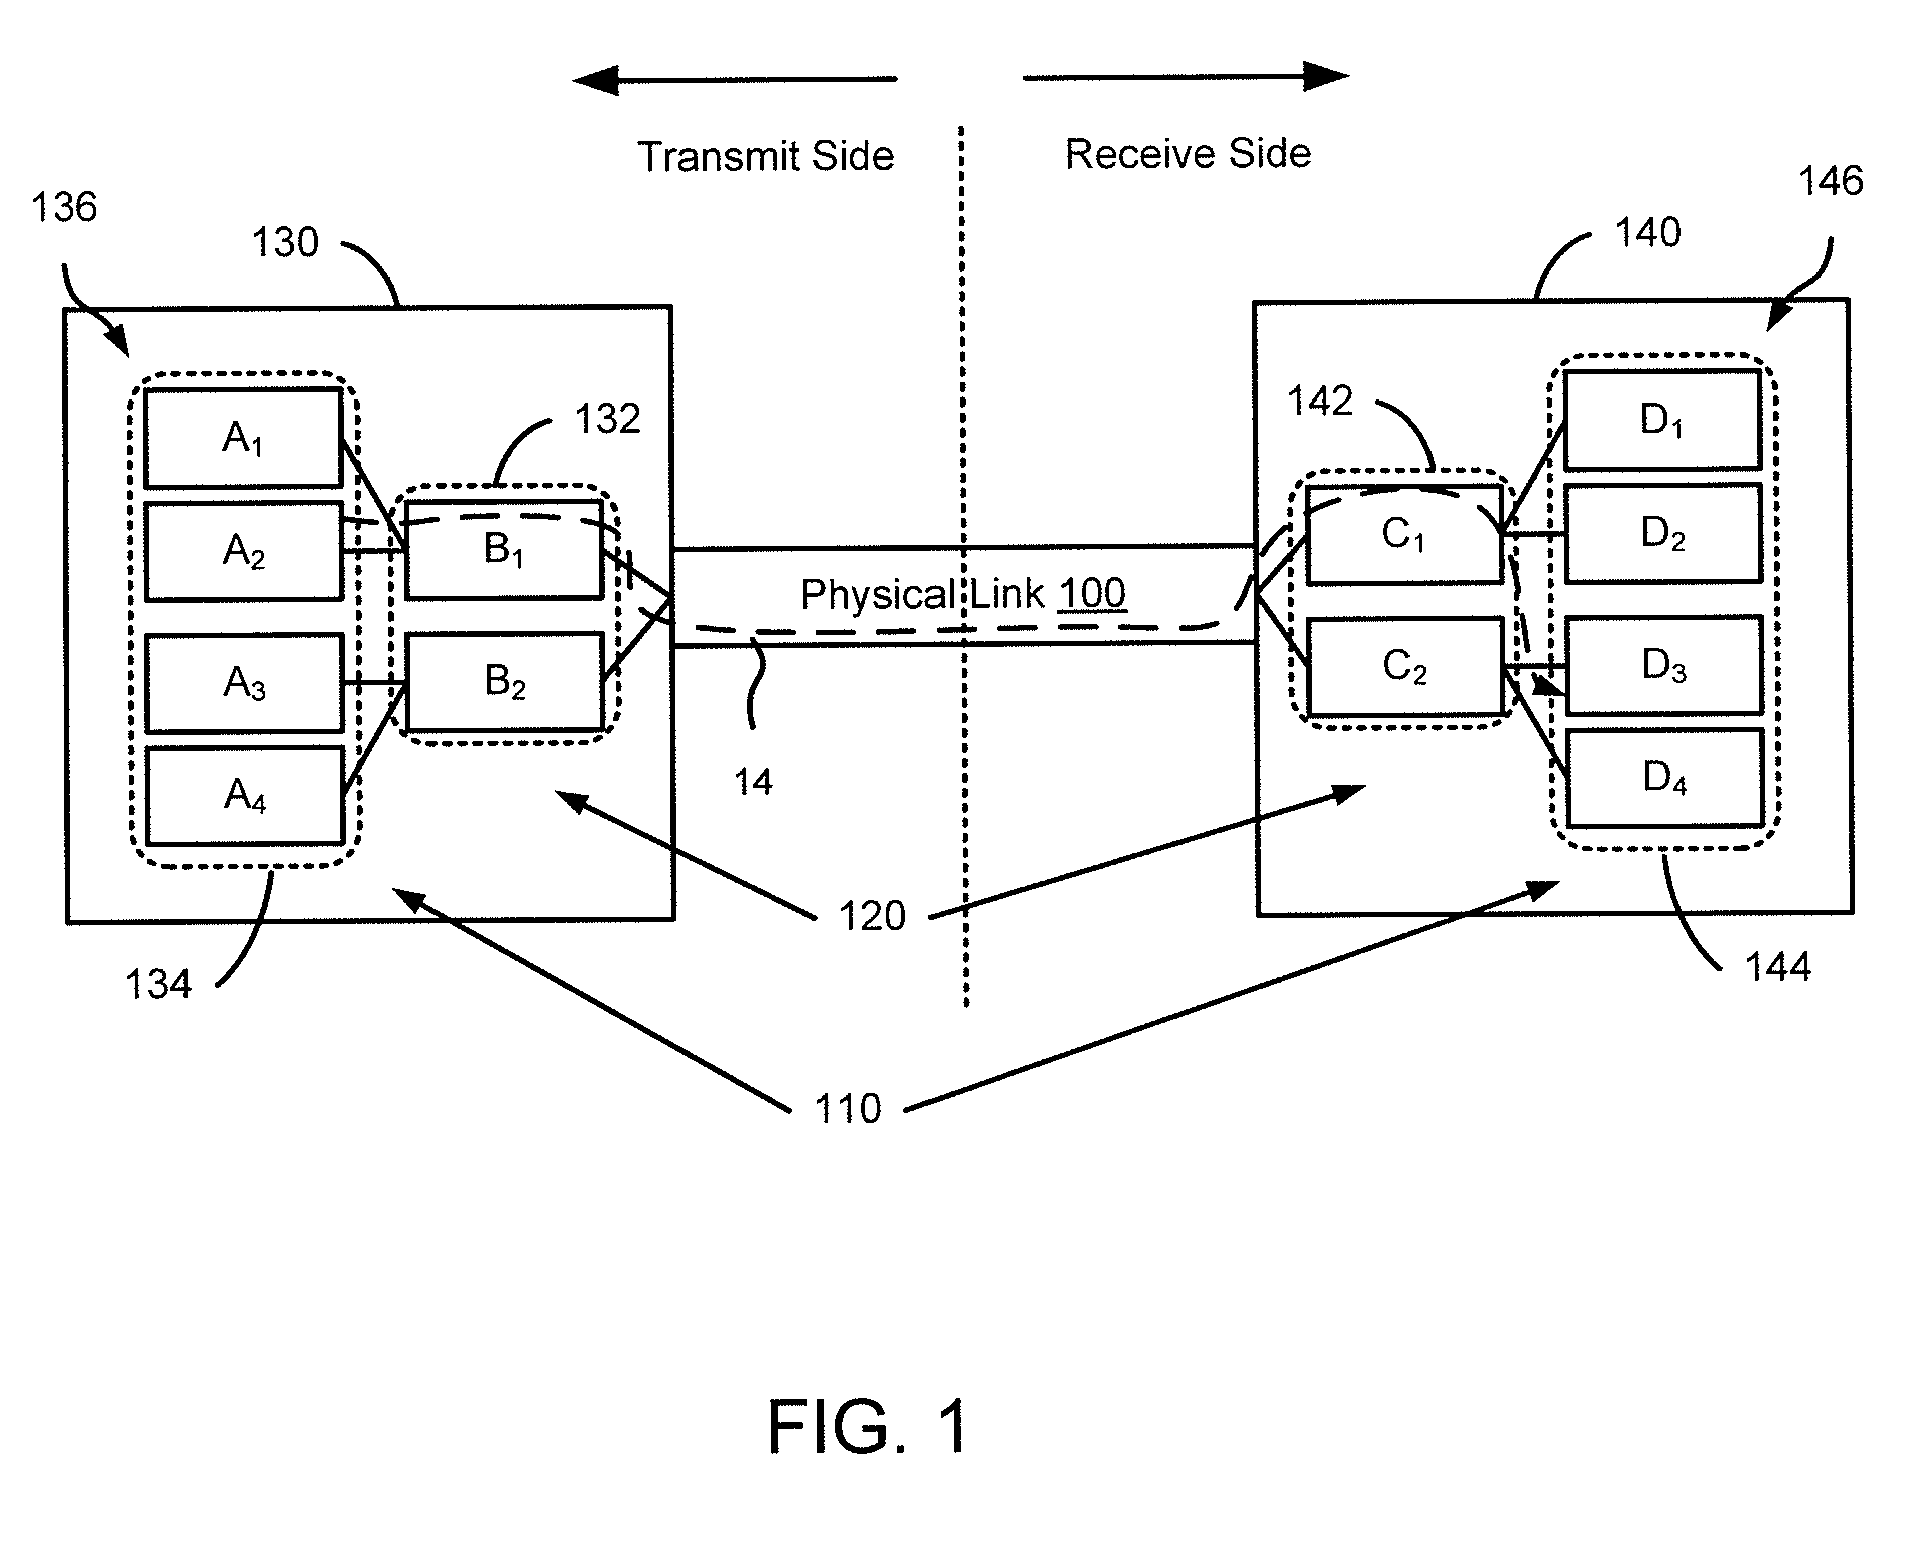 Methods and apparatus for flow control associated with multi-staged queues